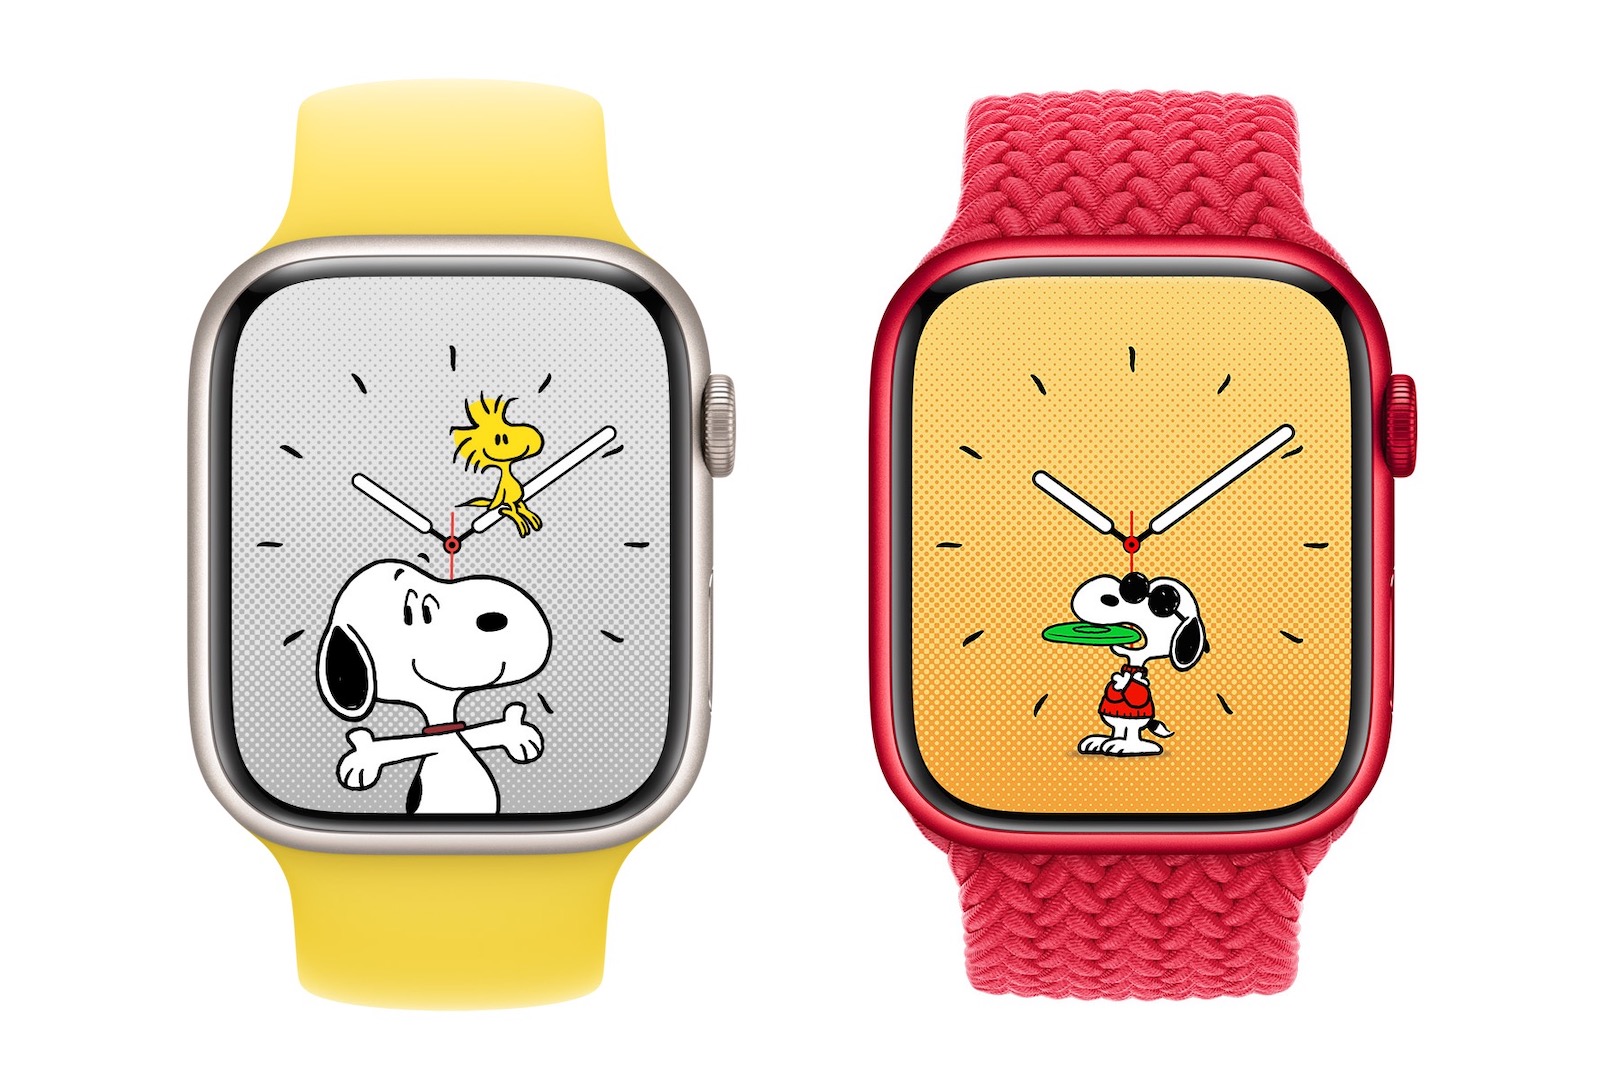 Snoopy watch faces